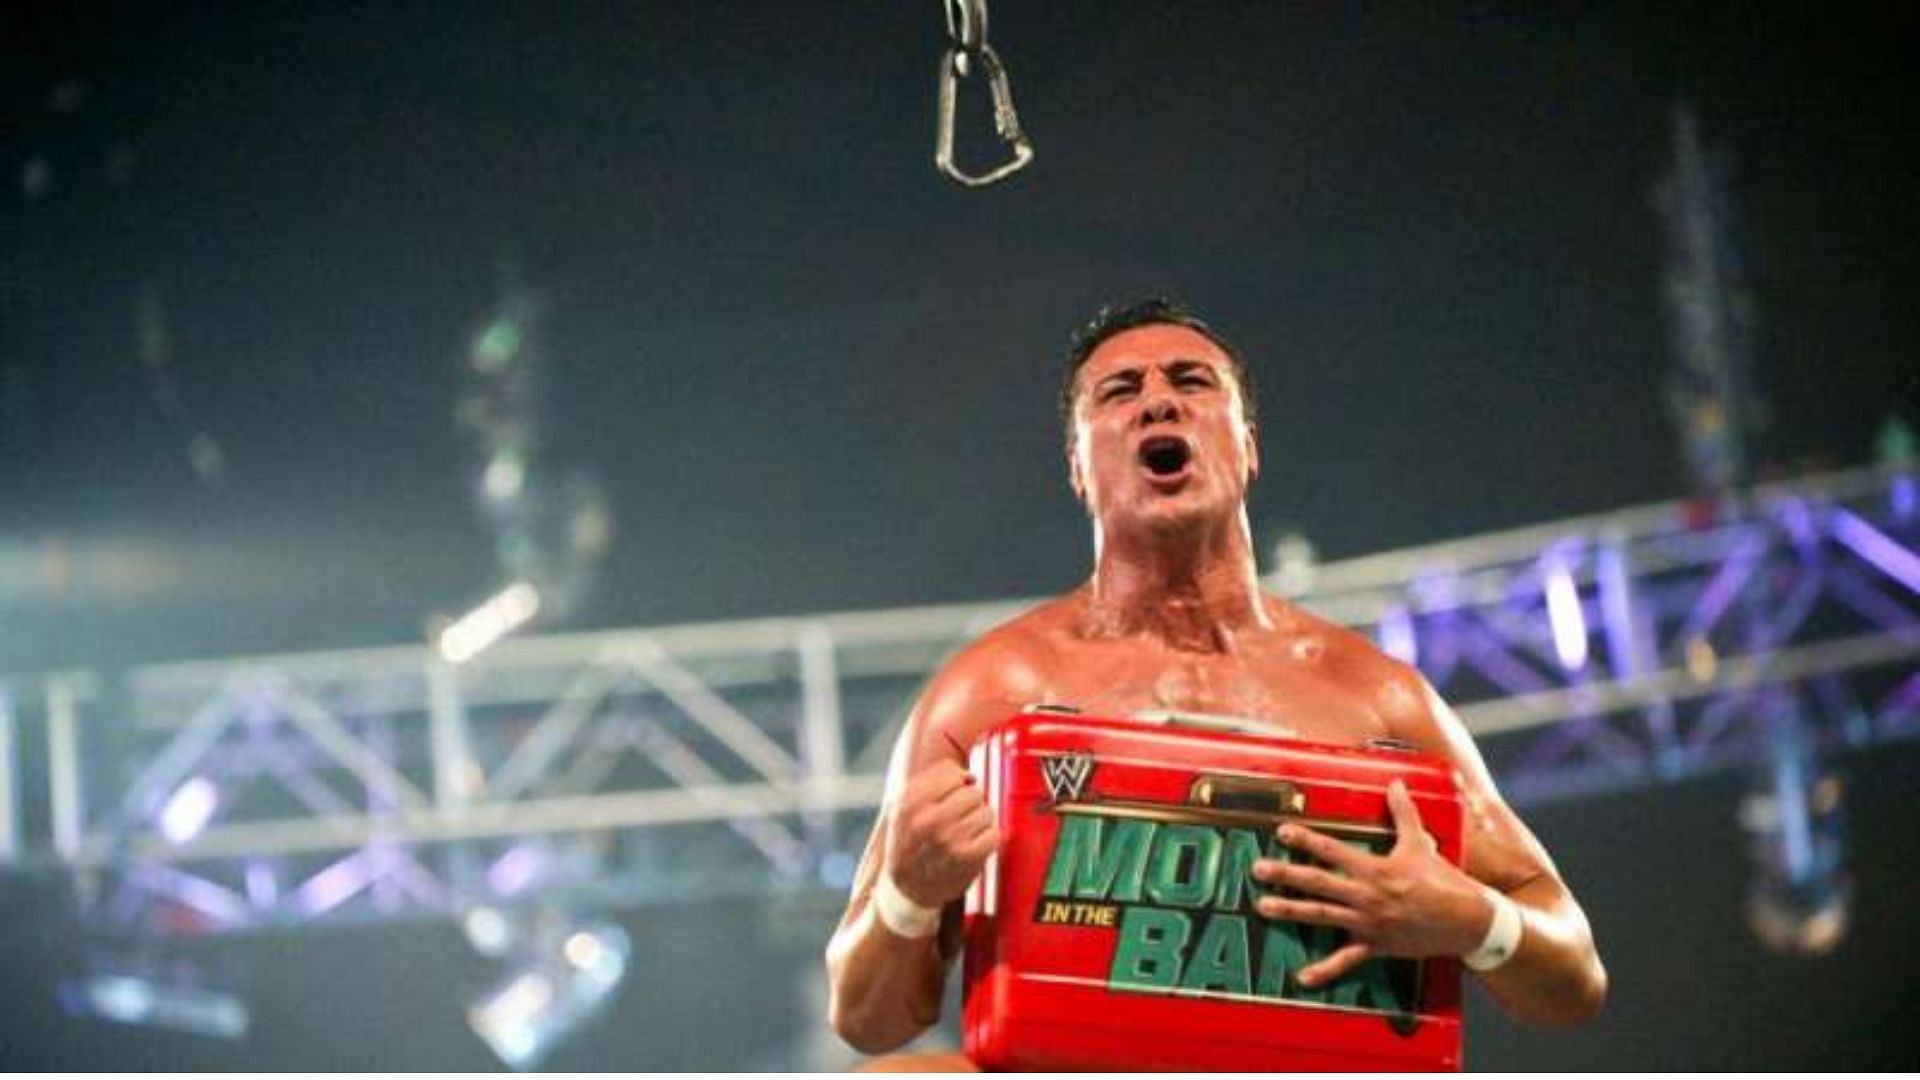 Alberto Del Rio has been one of the most successful Latin superstars in WWE